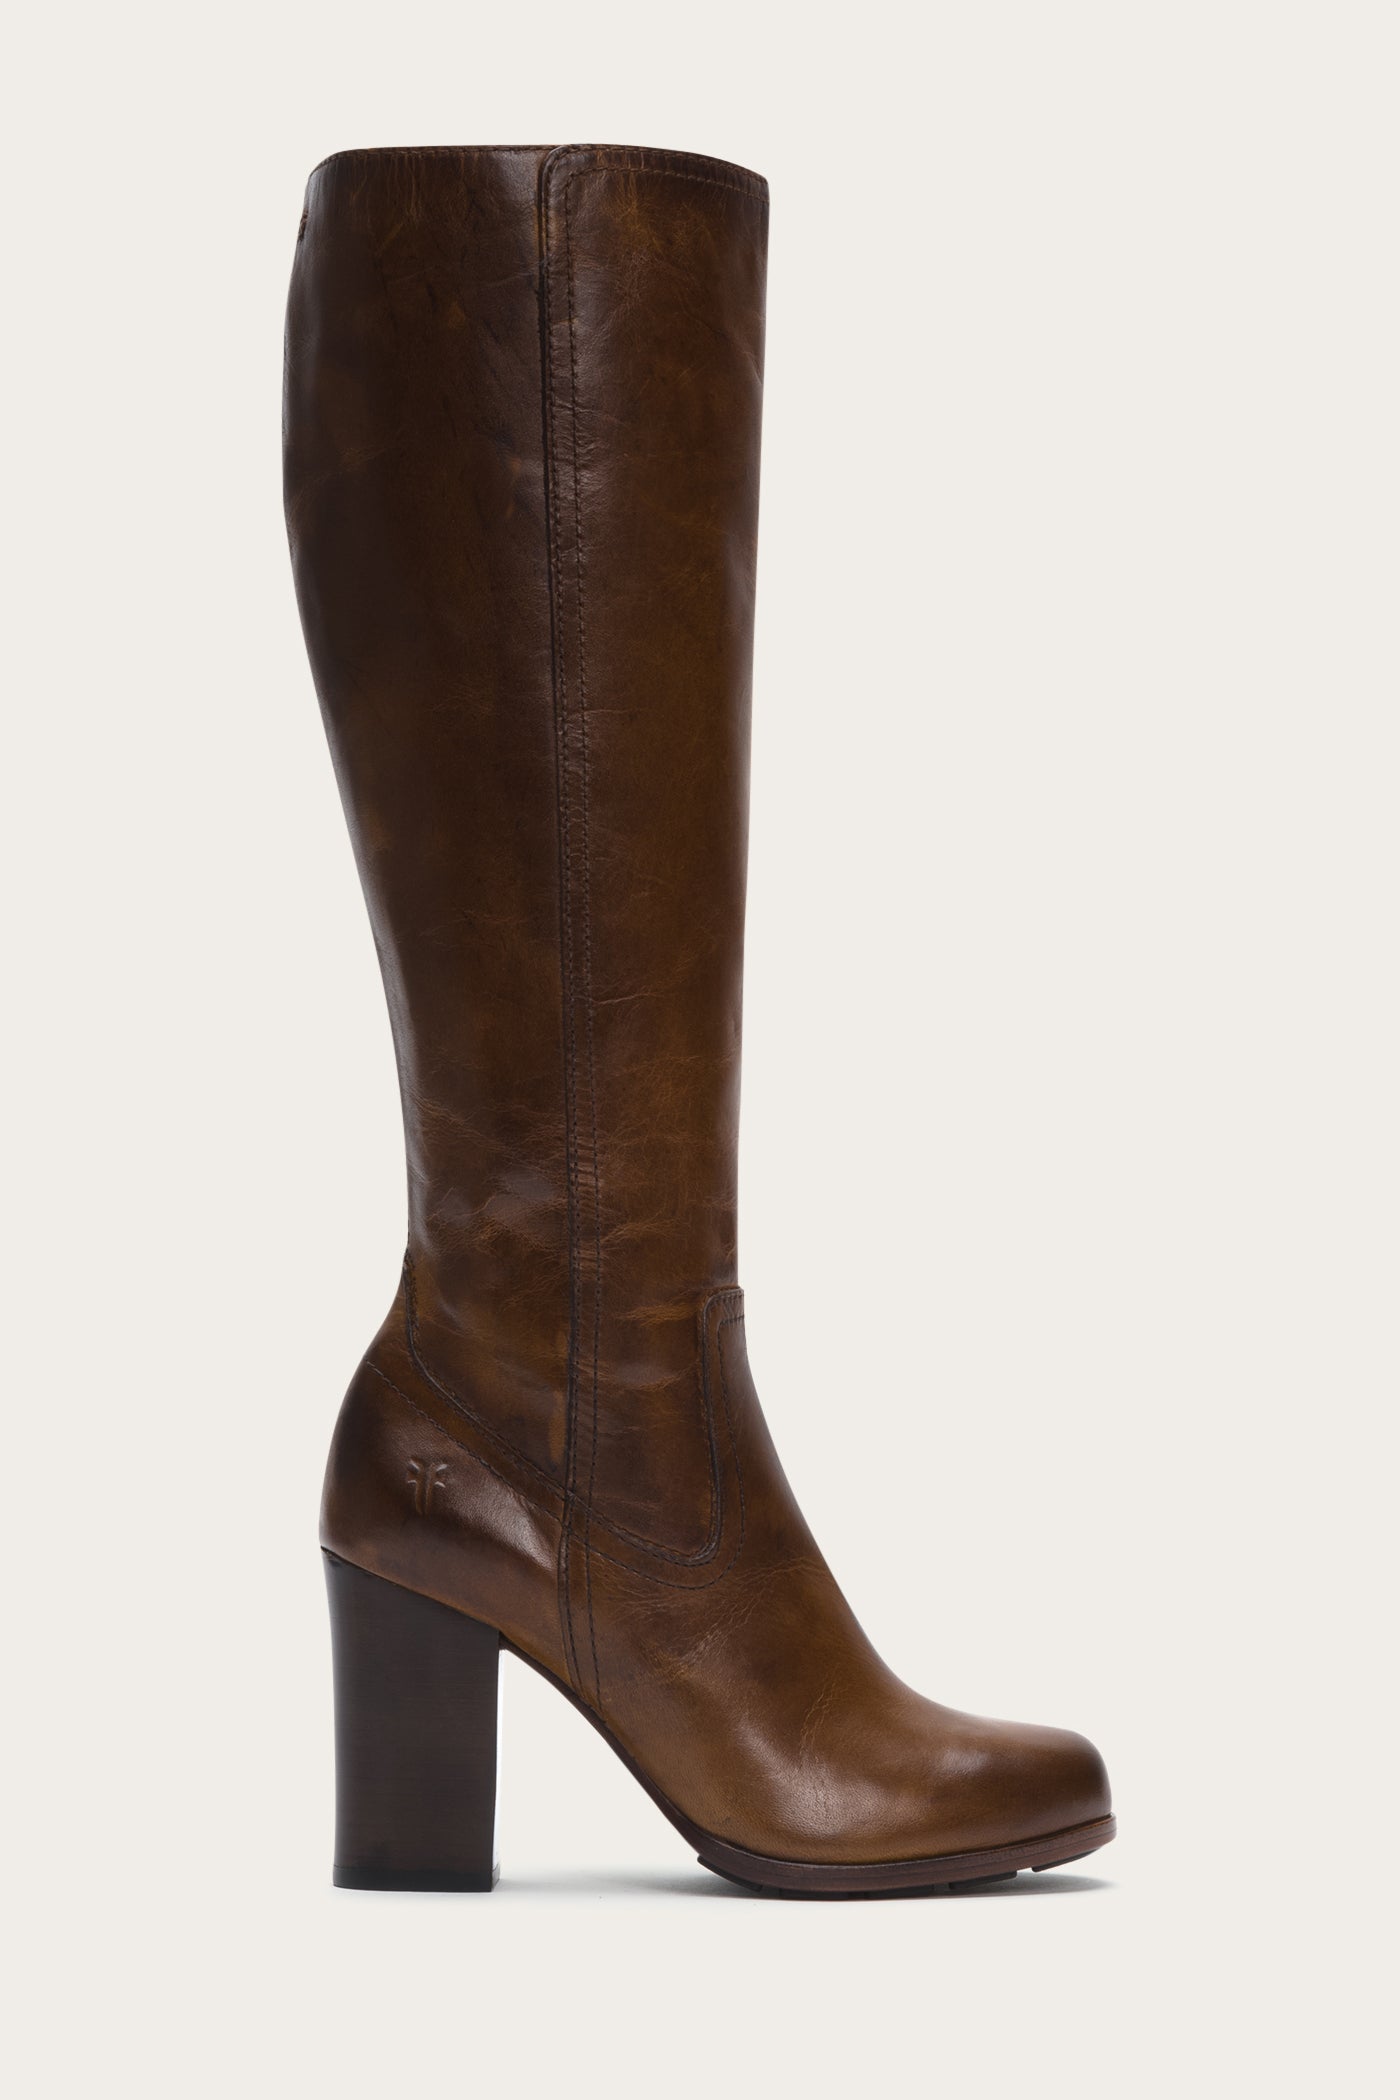 frye knee high lace up boots